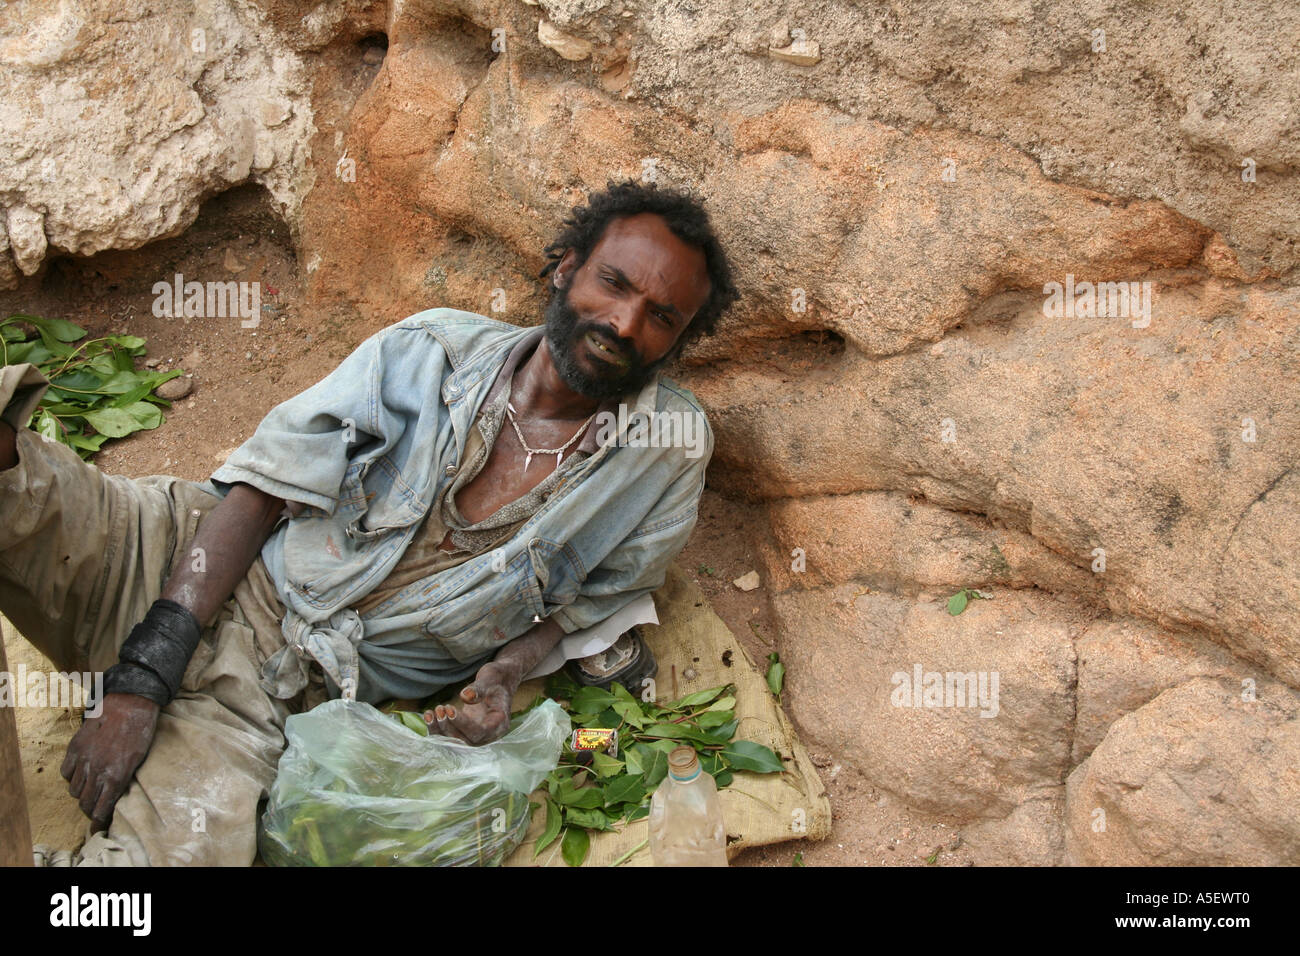 Harar, Ethiopia, Qat in the mouth of an addict Stock Photo